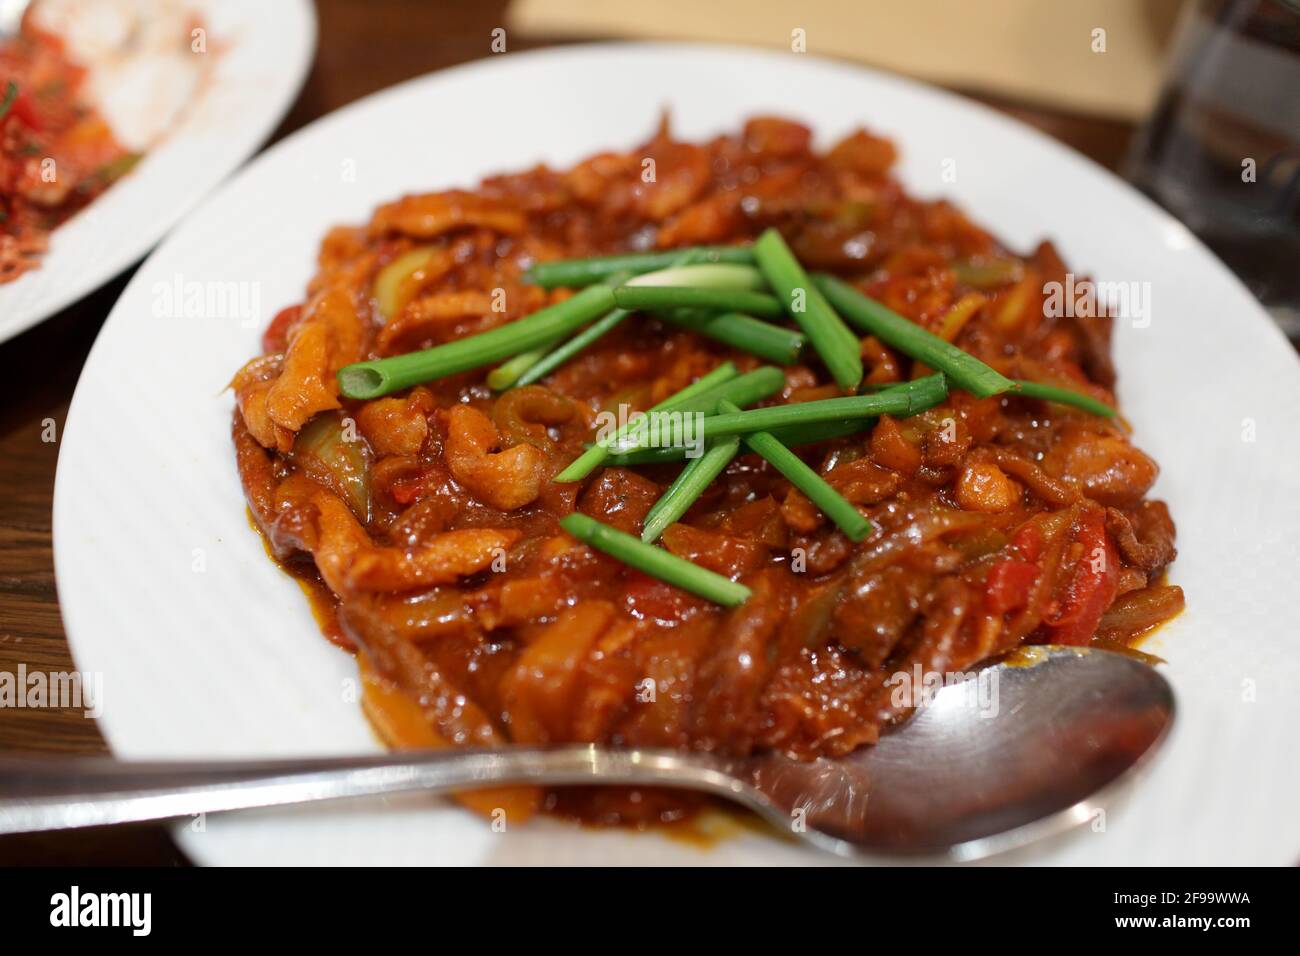 Beef stew on a white plate in an armanian restaurant Stock Photo